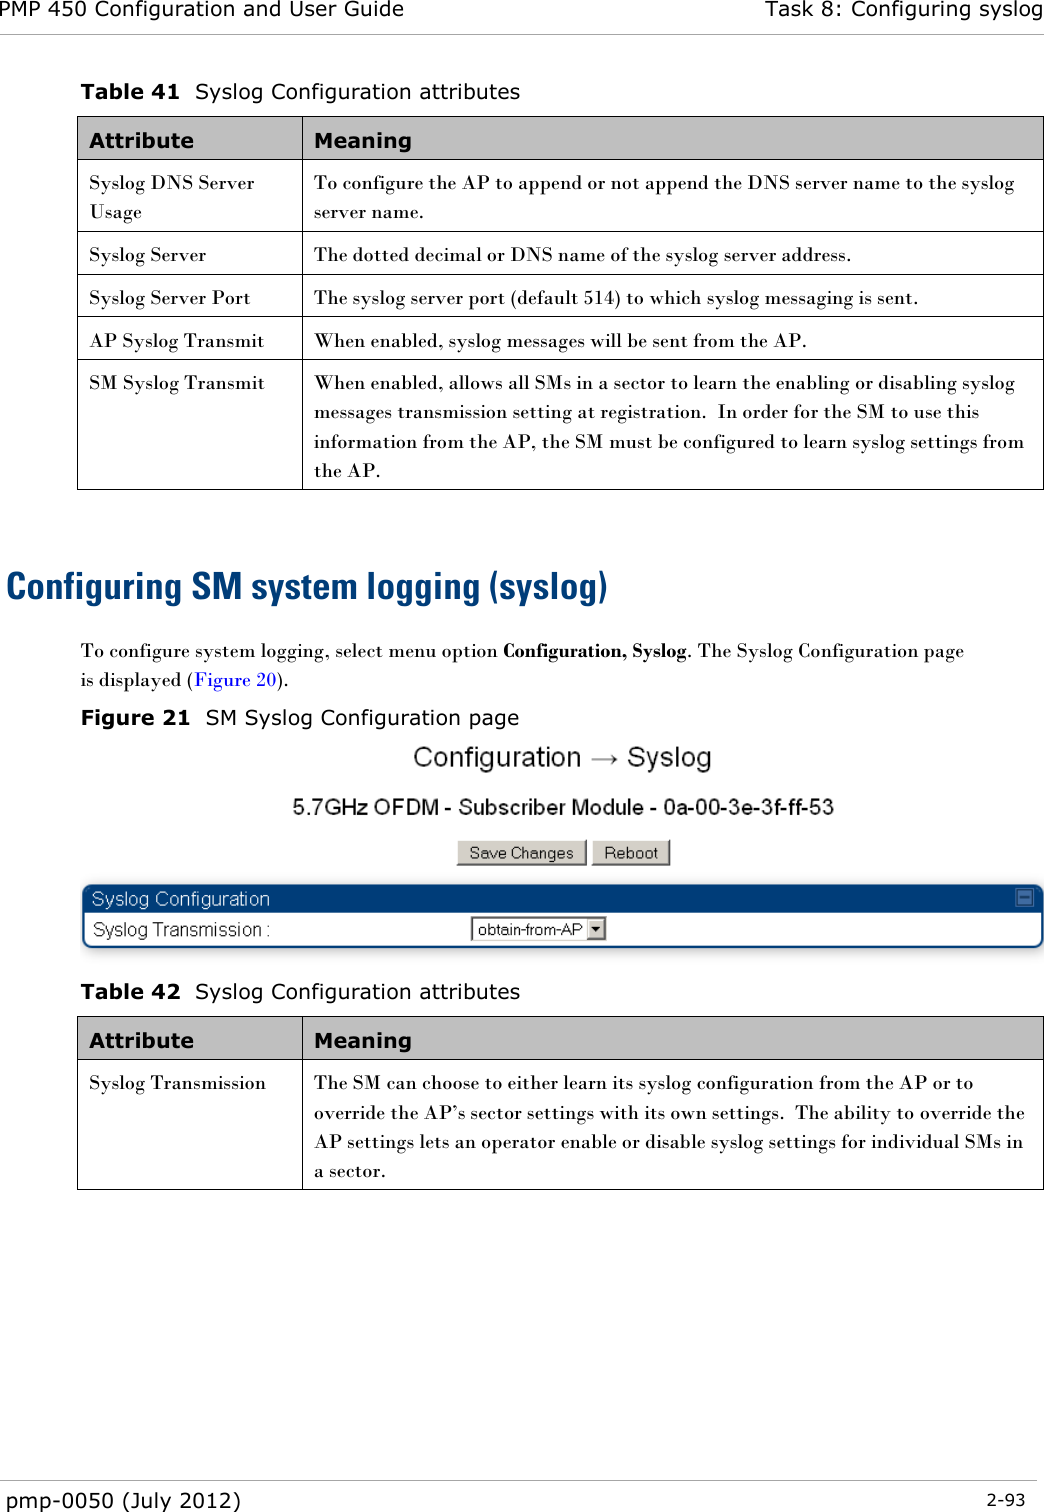 PMP 450 Configuration and User Guide Task 8: Configuring syslog  pmp-0050 (July 2012)  2-93  Table 41  Syslog Configuration attributes Attribute Meaning Syslog DNS Server Usage To configure the AP to append or not append the DNS server name to the syslog server name. Syslog Server The dotted decimal or DNS name of the syslog server address. Syslog Server Port The syslog server port (default 514) to which syslog messaging is sent. AP Syslog Transmit When enabled, syslog messages will be sent from the AP. SM Syslog Transmit When enabled, allows all SMs in a sector to learn the enabling or disabling syslog messages transmission setting at registration.  In order for the SM to use this information from the AP, the SM must be configured to learn syslog settings from the AP.  Configuring SM system logging (syslog) To configure system logging, select menu option Configuration, Syslog. The Syslog Configuration page is displayed (Figure 20).  Figure 21  SM Syslog Configuration page  Table 42  Syslog Configuration attributes Attribute Meaning Syslog Transmission The SM can choose to either learn its syslog configuration from the AP or to override the AP‘s sector settings with its own settings.  The ability to override the AP settings lets an operator enable or disable syslog settings for individual SMs in a sector.    